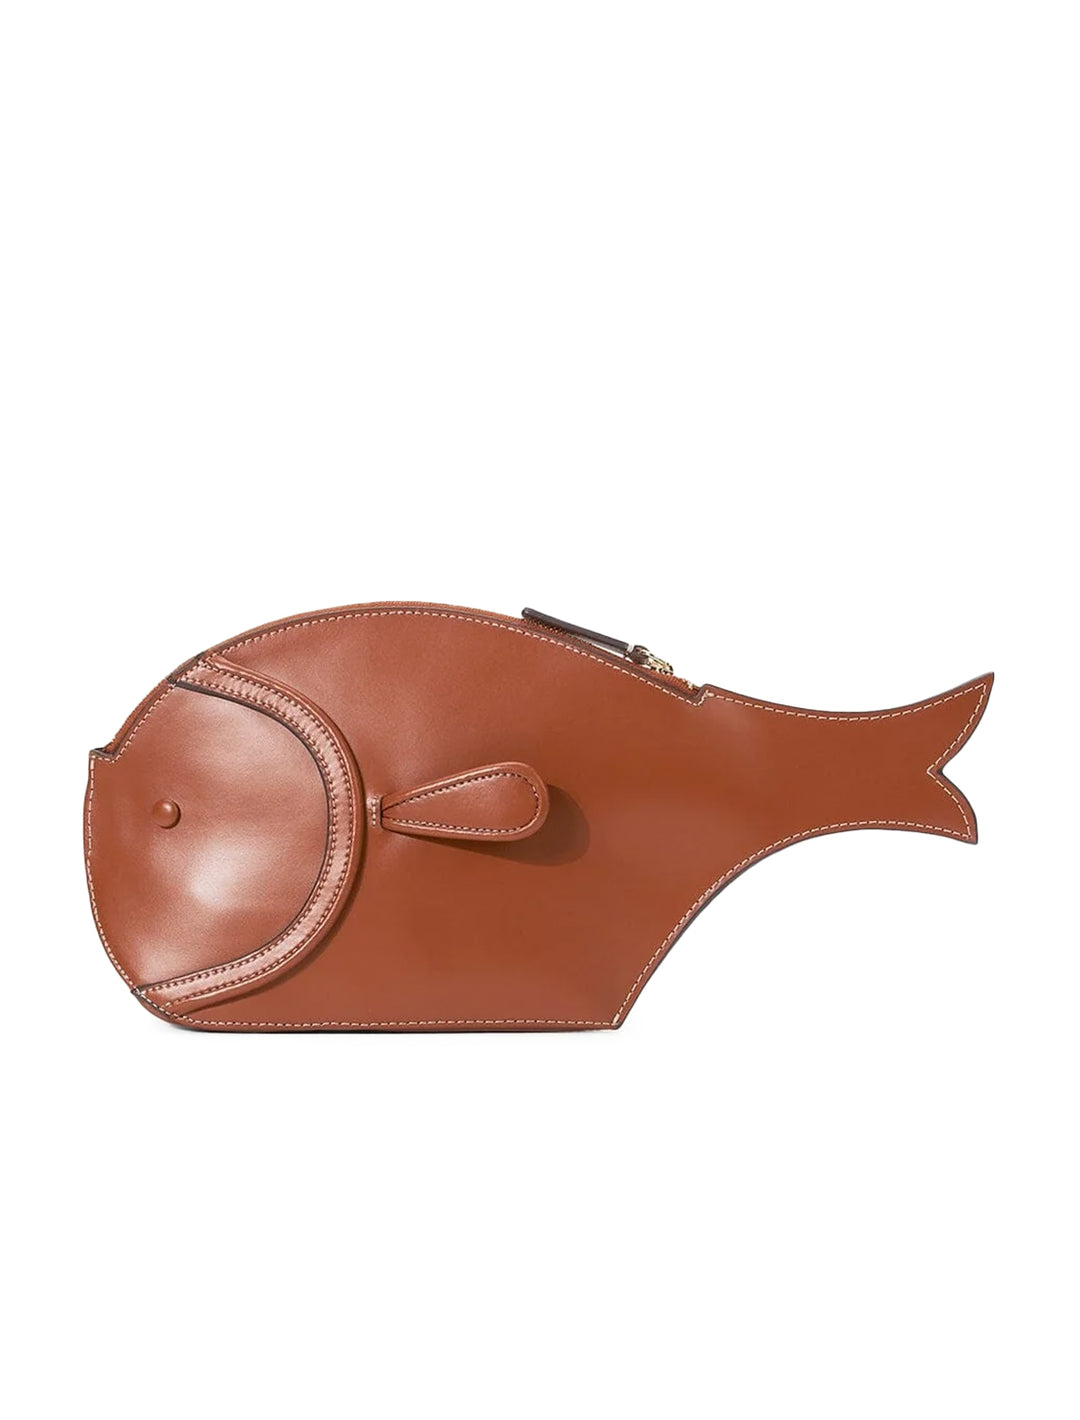 Side view of STAUD's pesce leather clutch in tan.